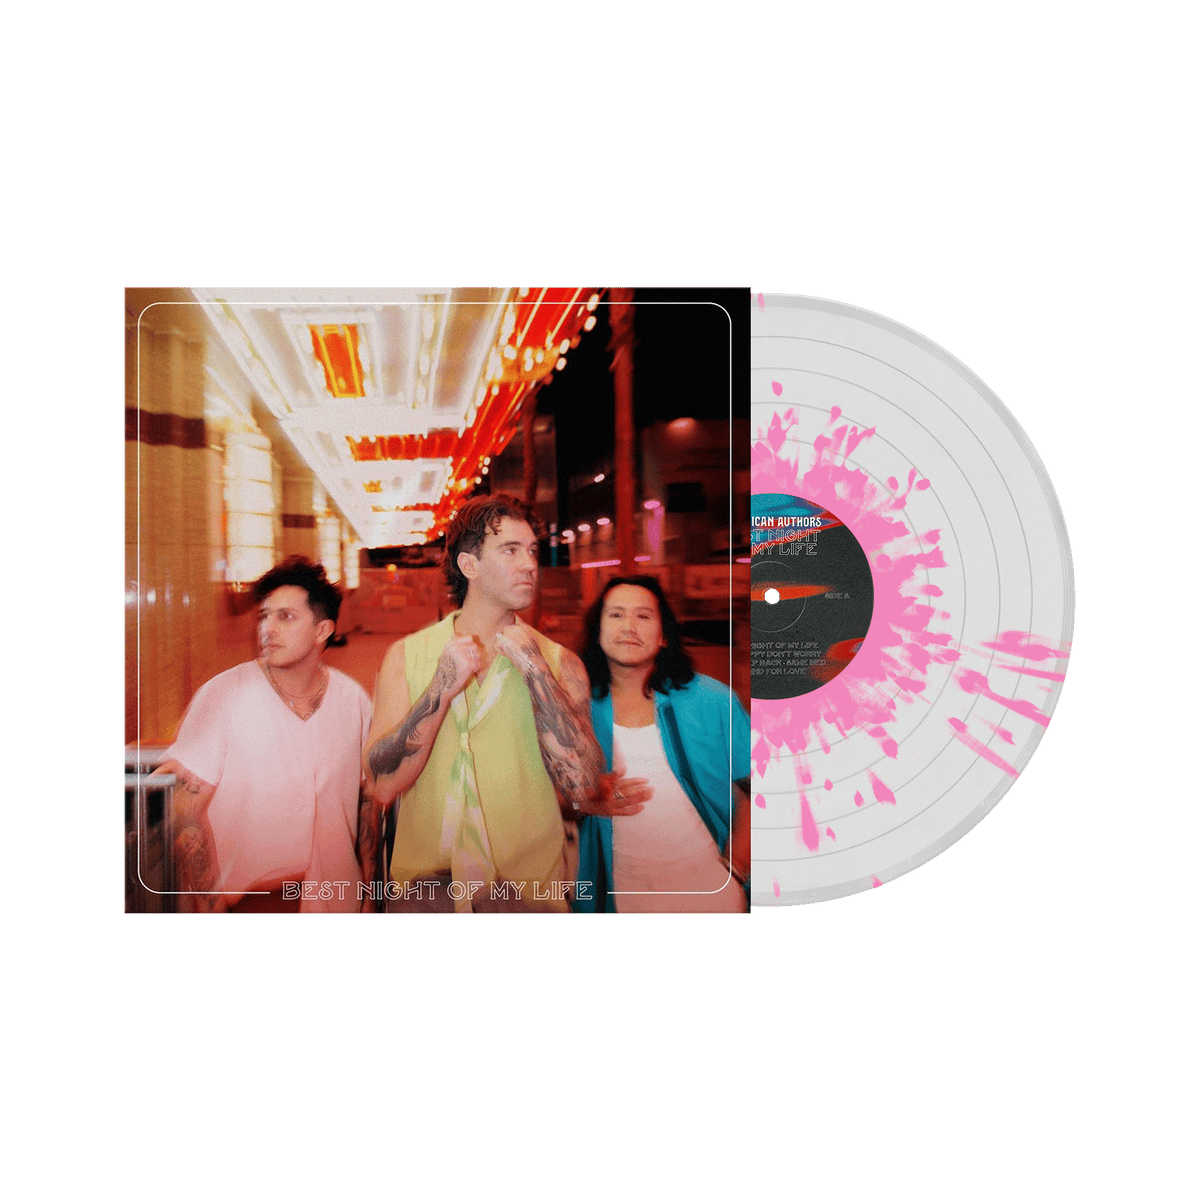 Best Night Of My Life Limited Edition Vinyl